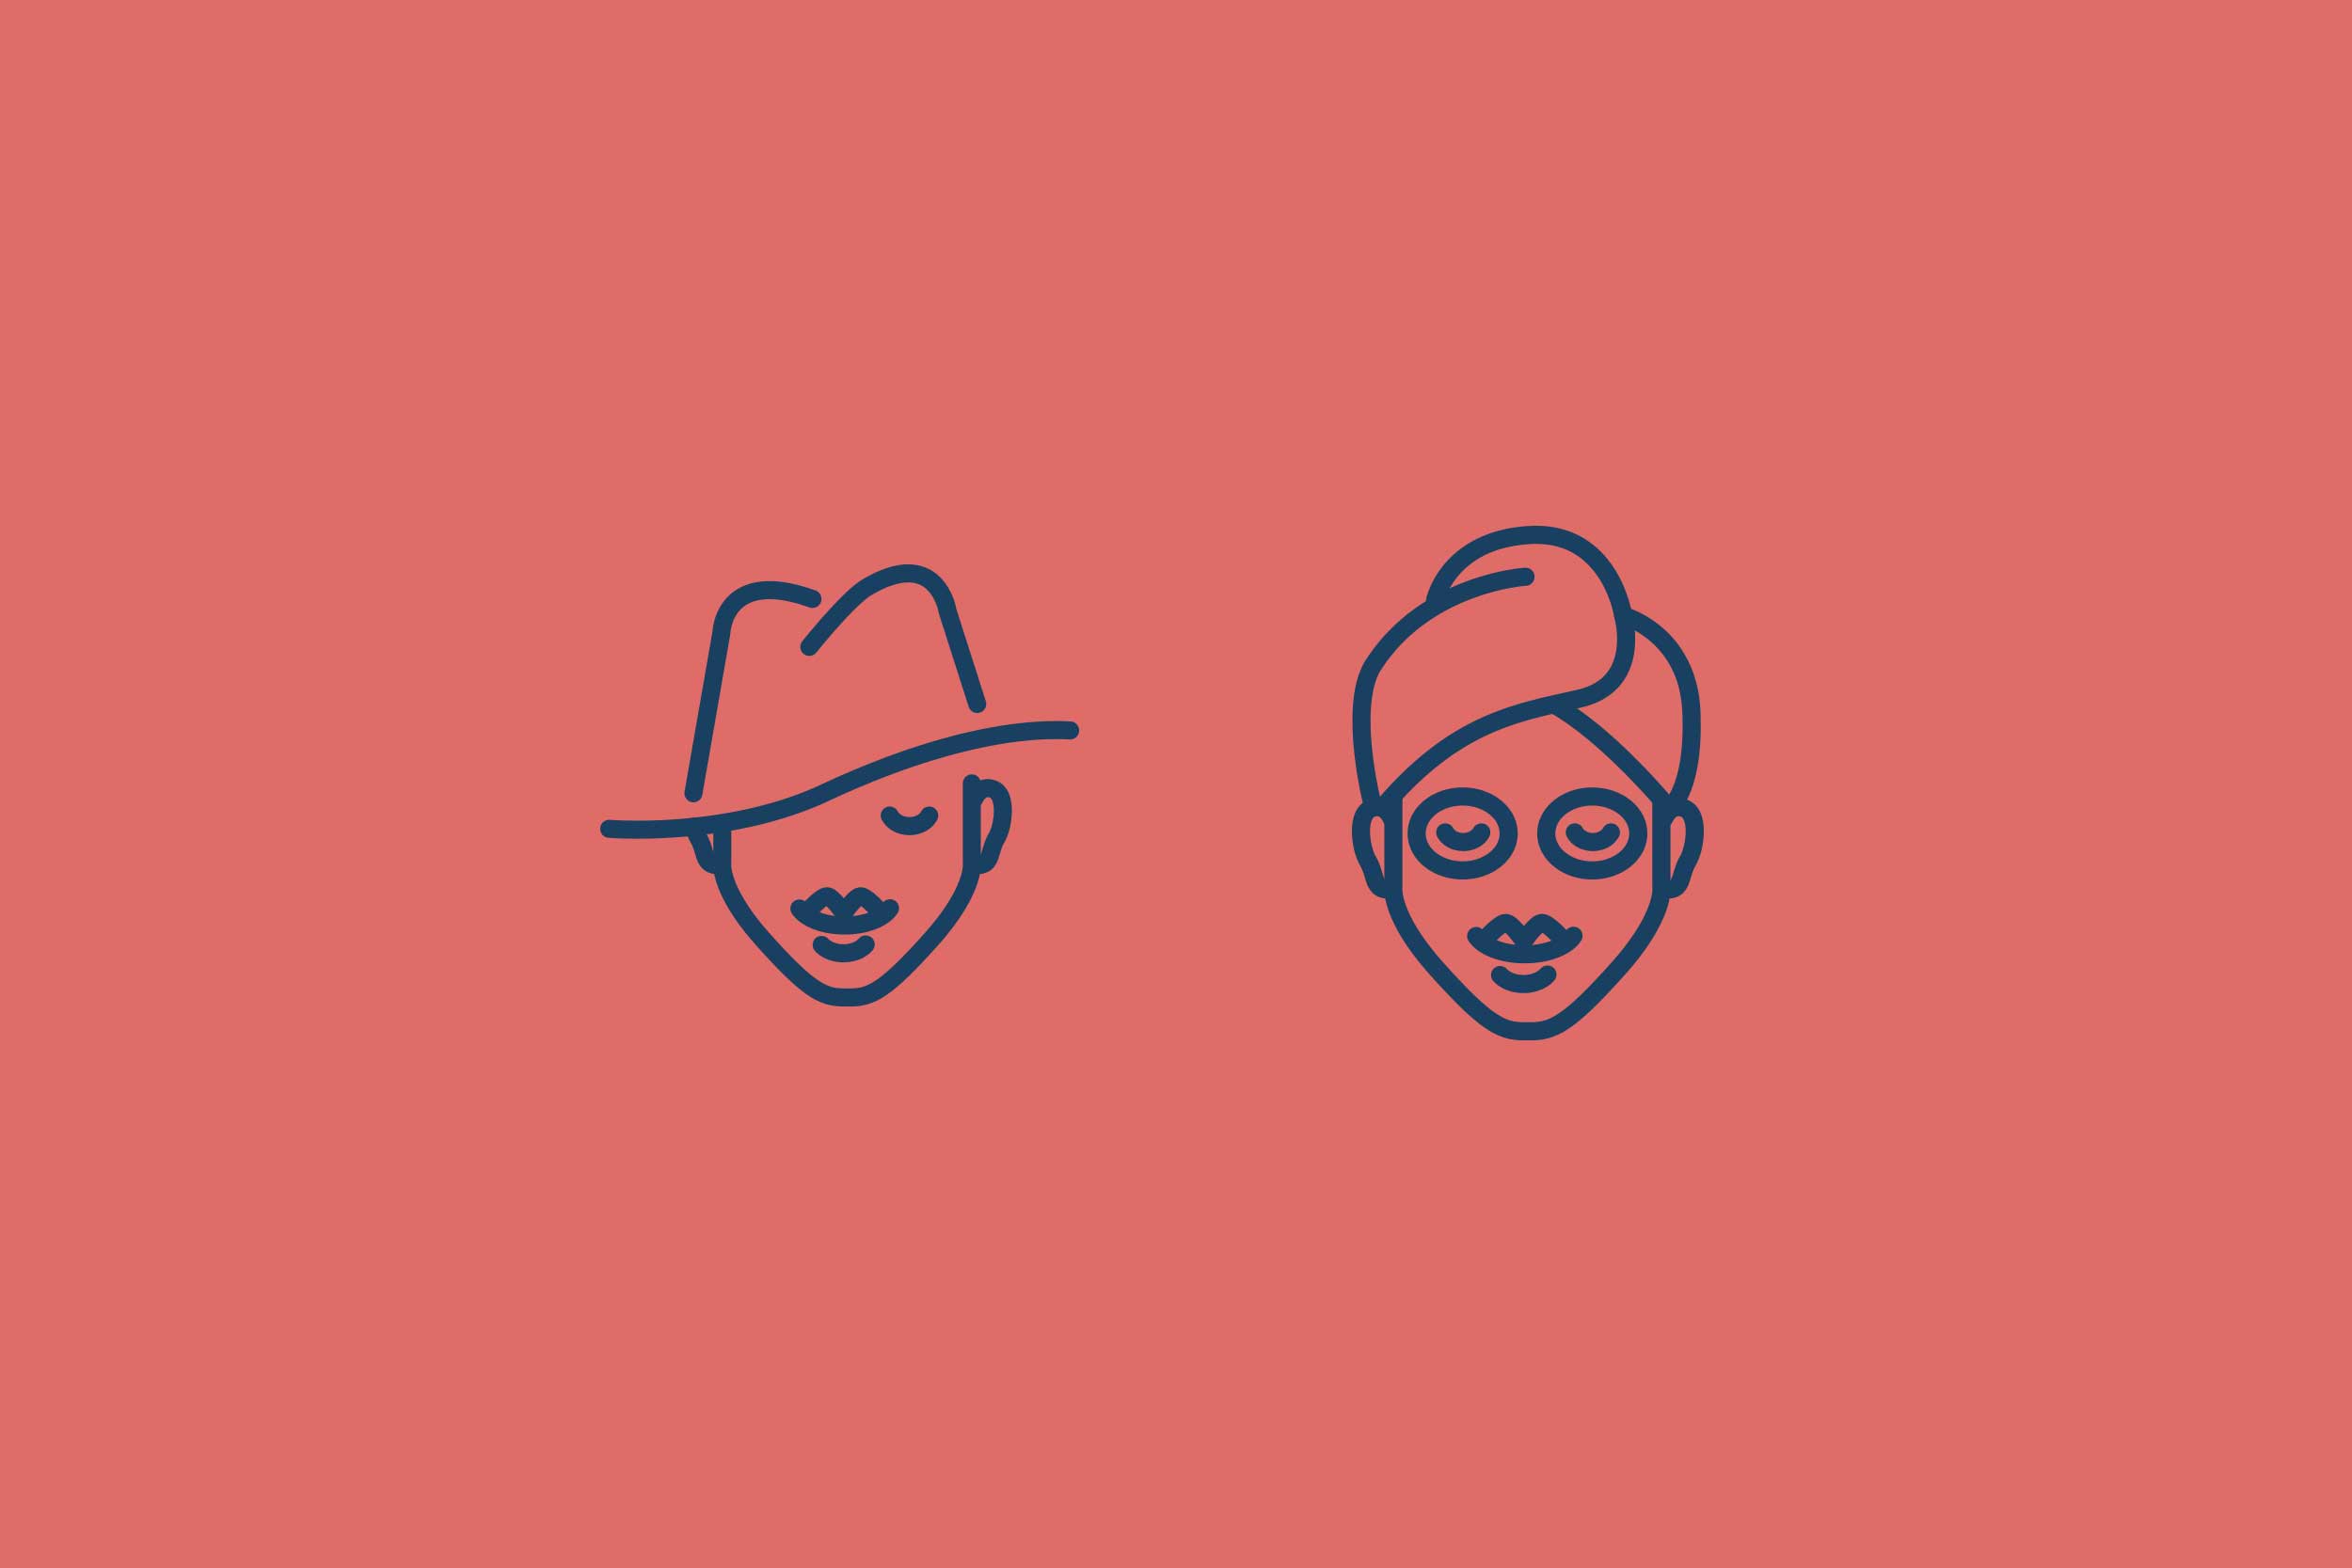 Style and Skin Type icons designed for the Wheesearch brand that is used across all channels.